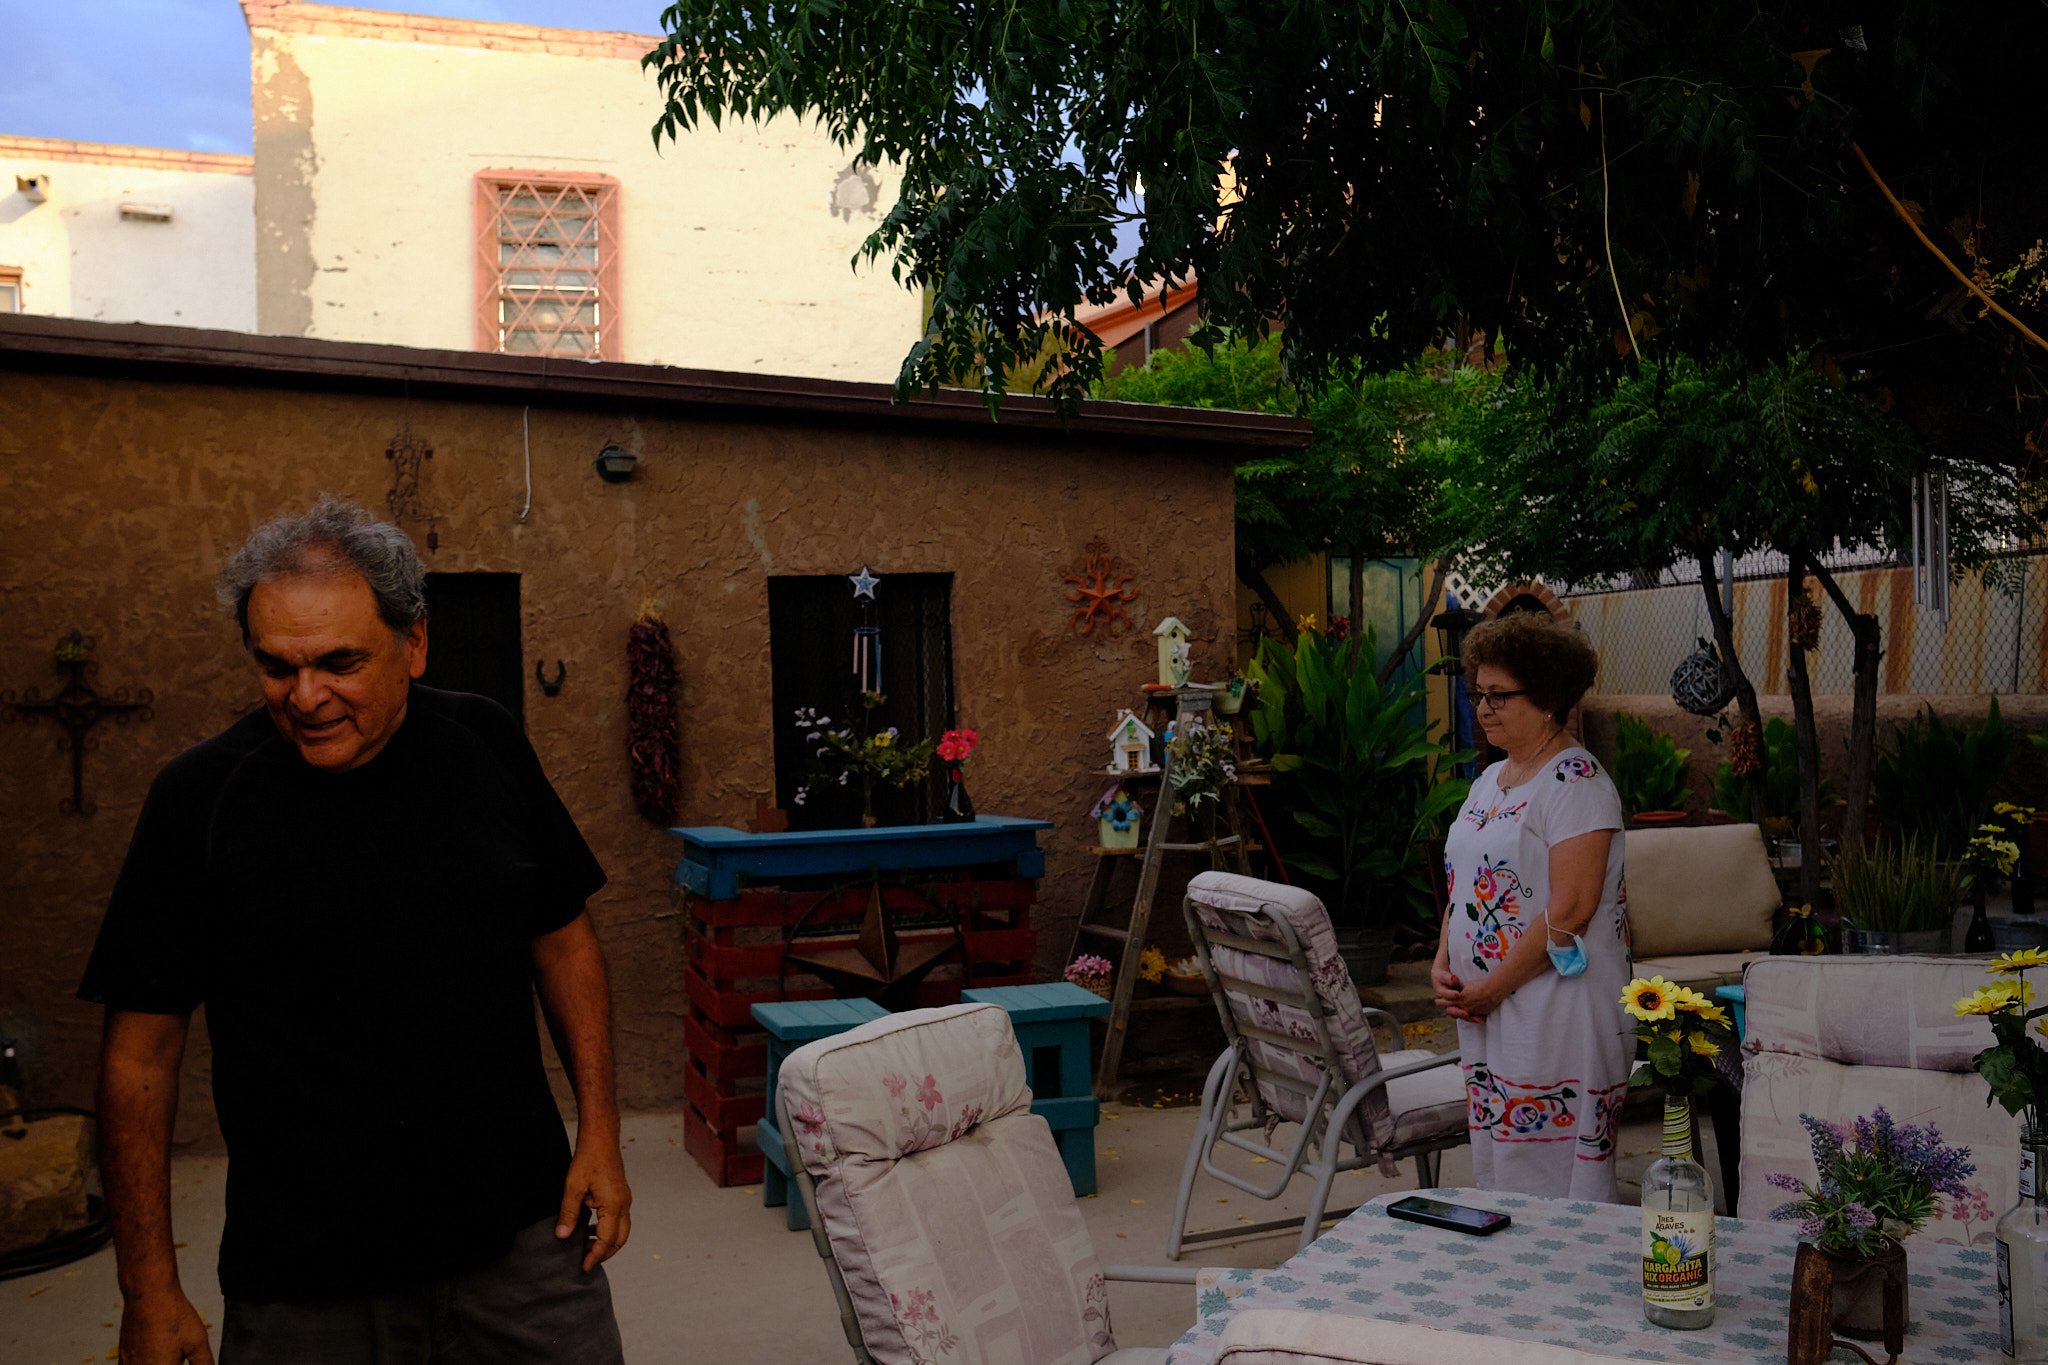 Rogelio Chavira is for Biden. Dolores Chacon is for Trump. The border fence passes through the couple’s backyard.